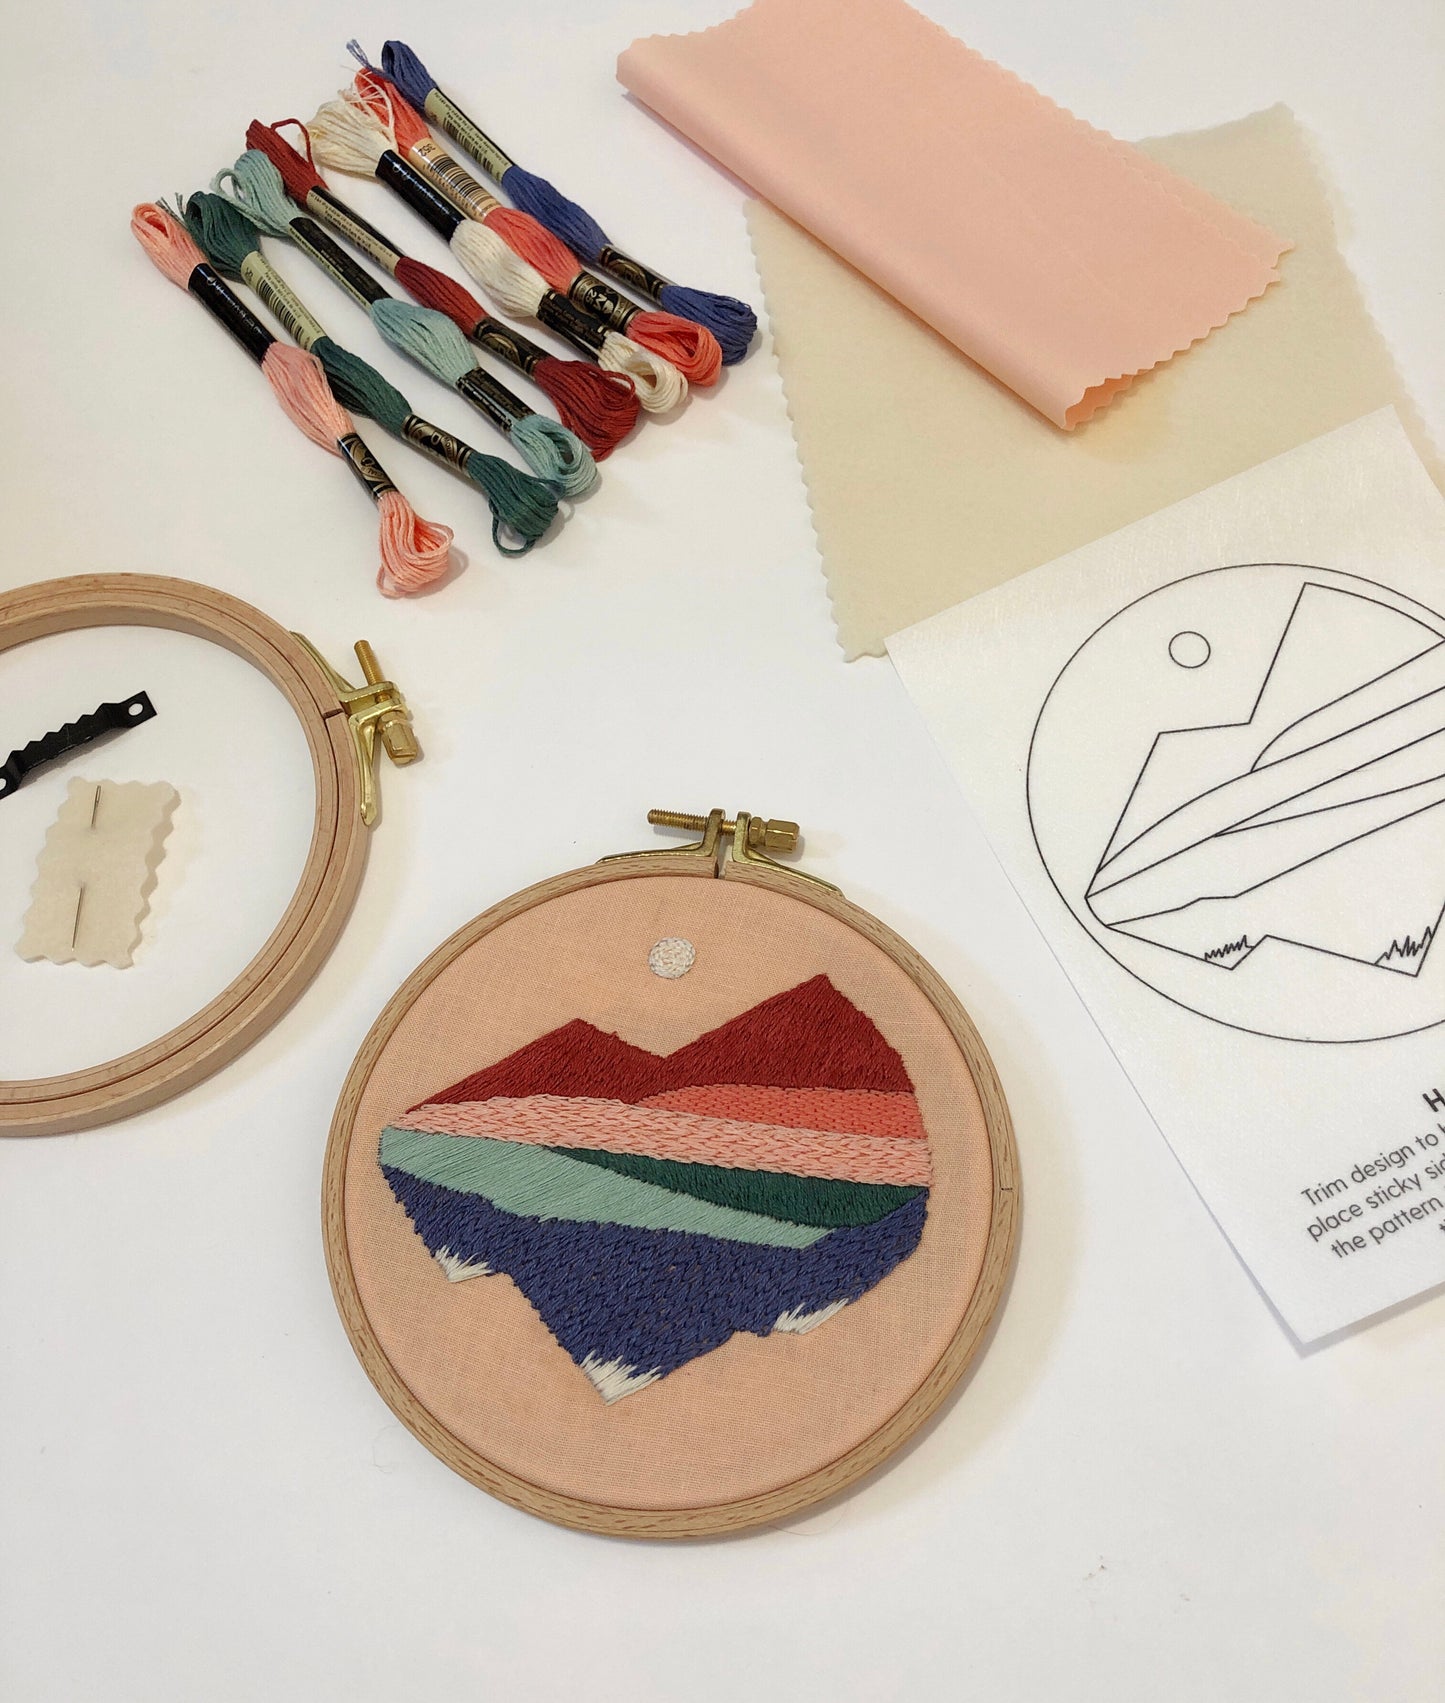 Mountainscapes - Intermediate DIY Embroidery Kit